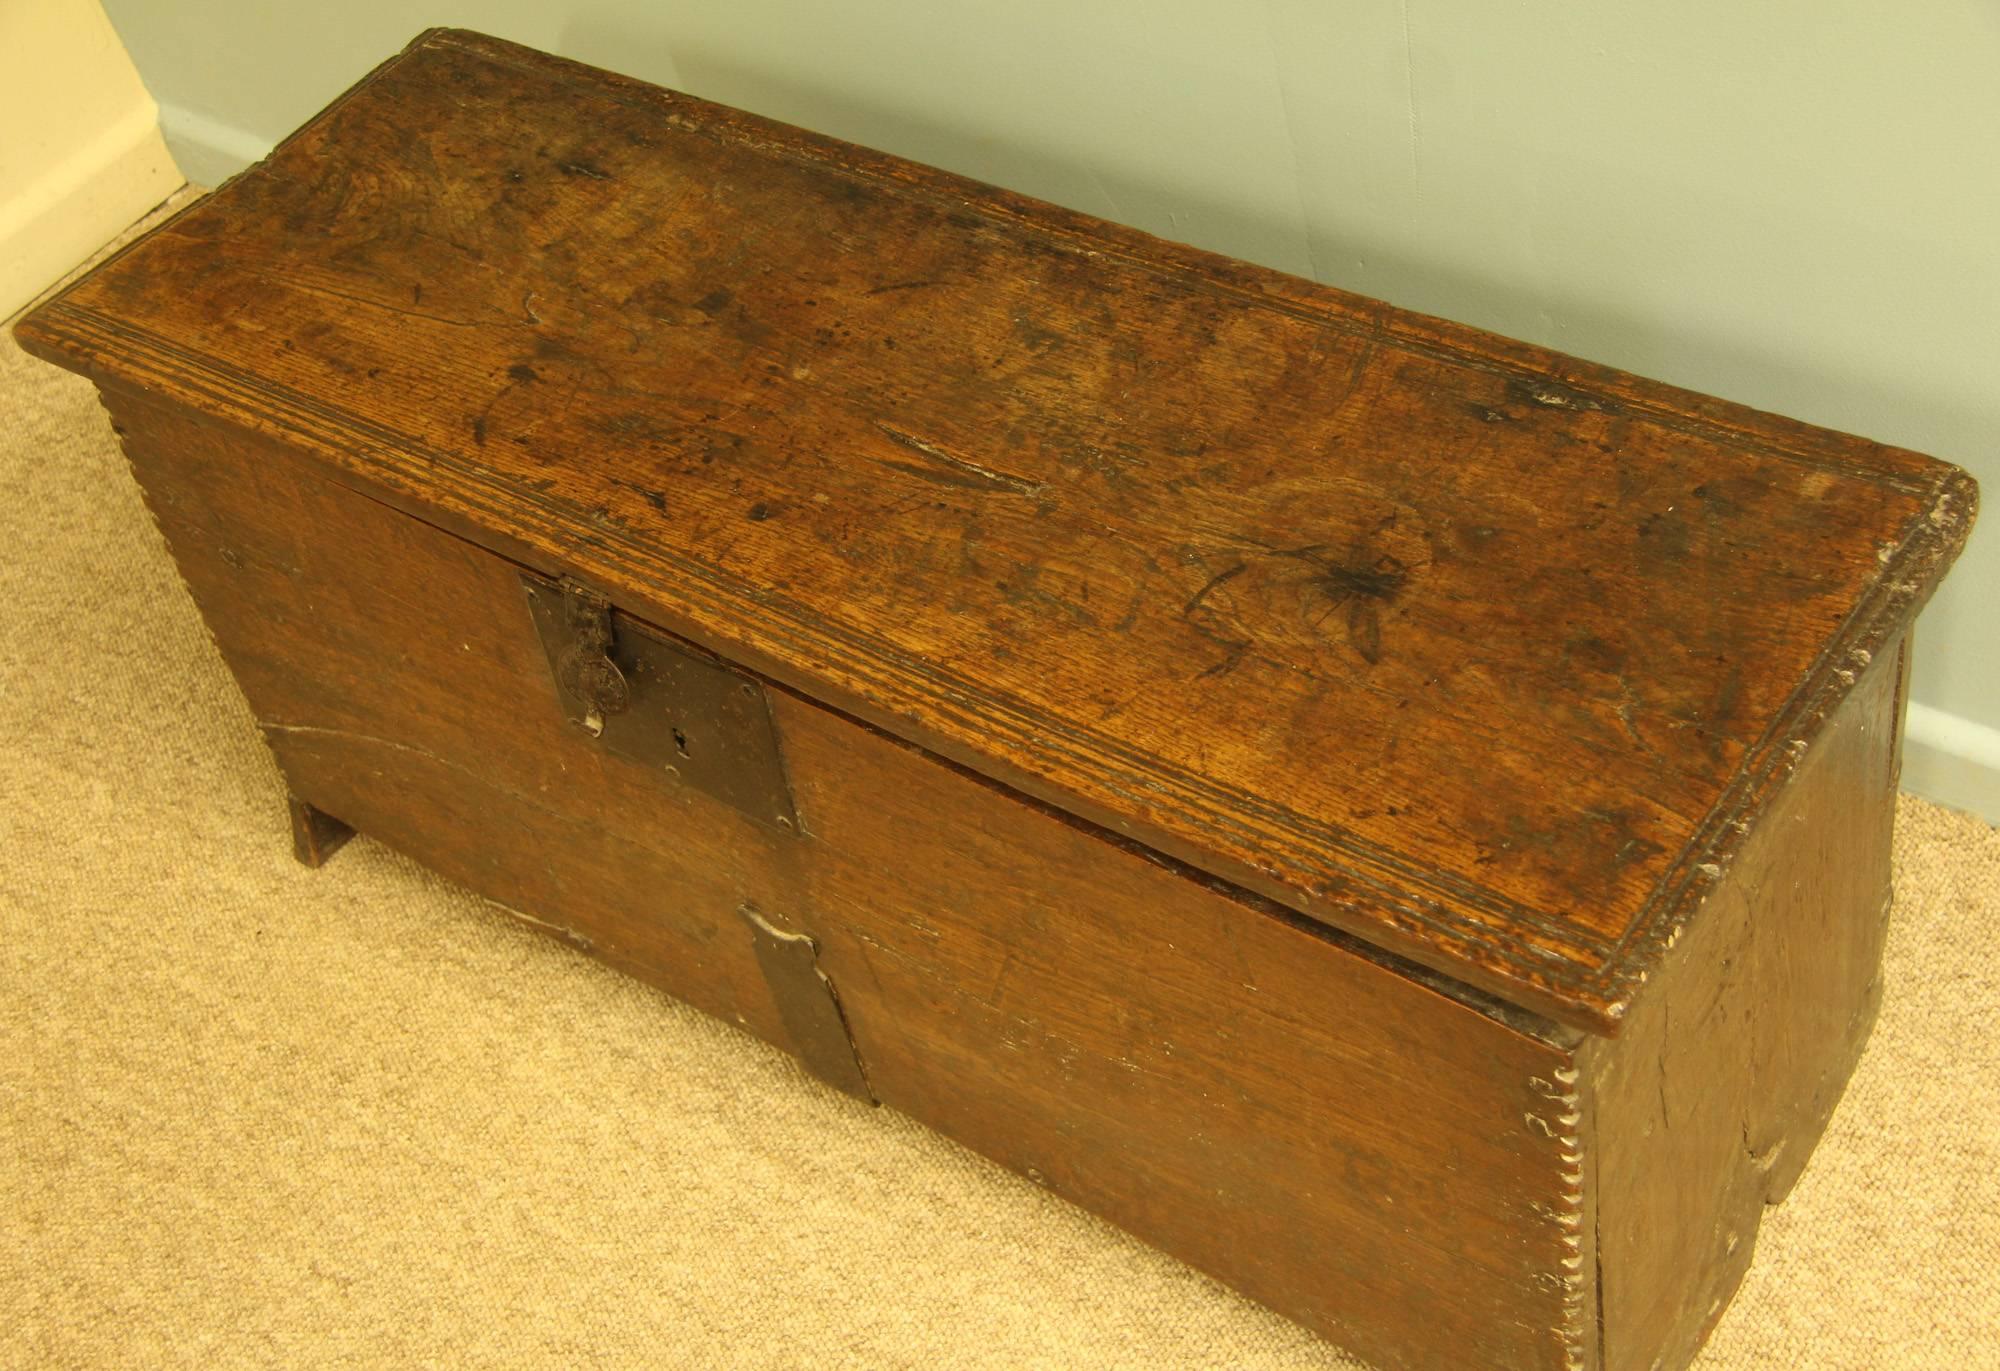 Mid-17th century small oak coffer with integral candle box.

Please note – this is only available to view by appointment only.

All of the items that we advertise for sale have been as accurately described as possible and are in excellent